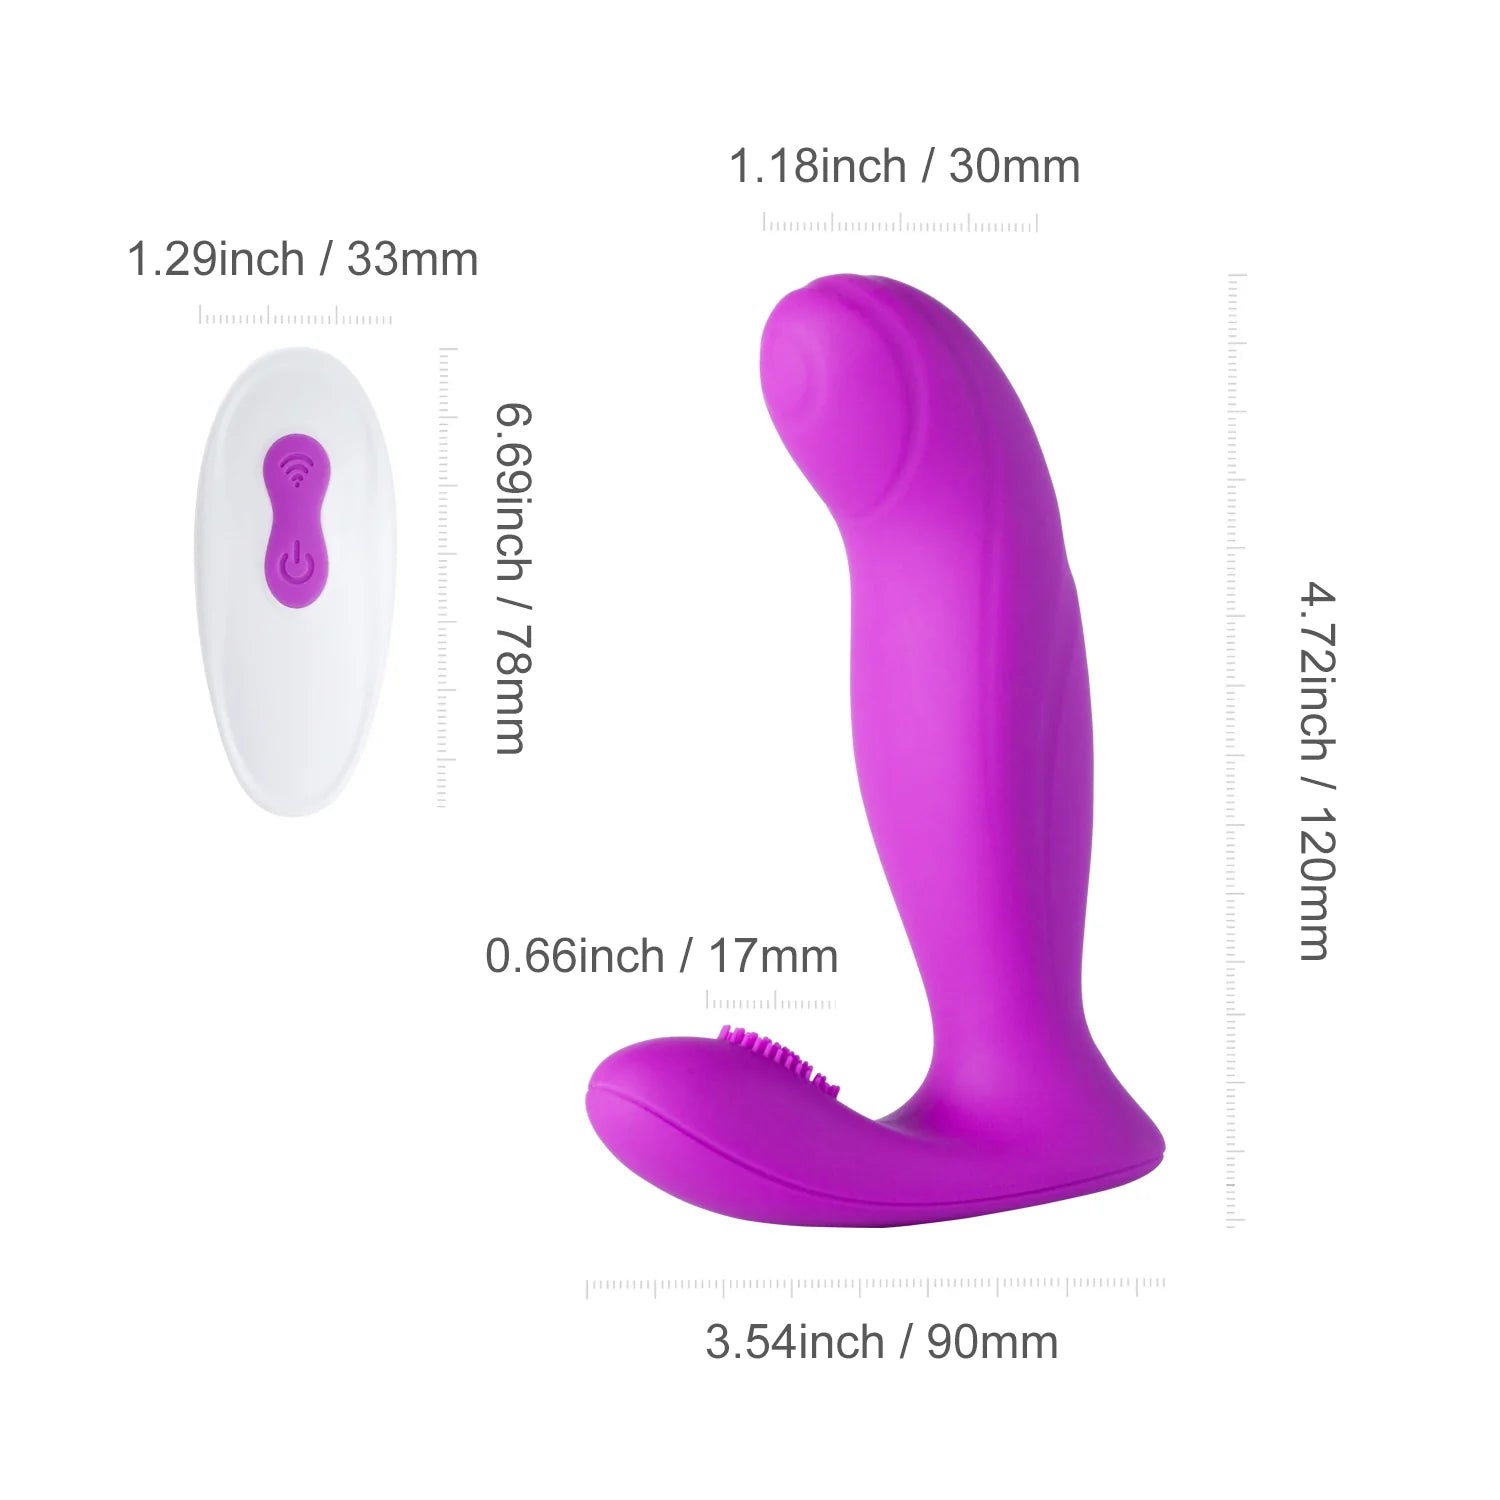 Allure G-Spot Vibrator with Clit Stimulator: Enhance Your Intimate Moments-BestGSpot